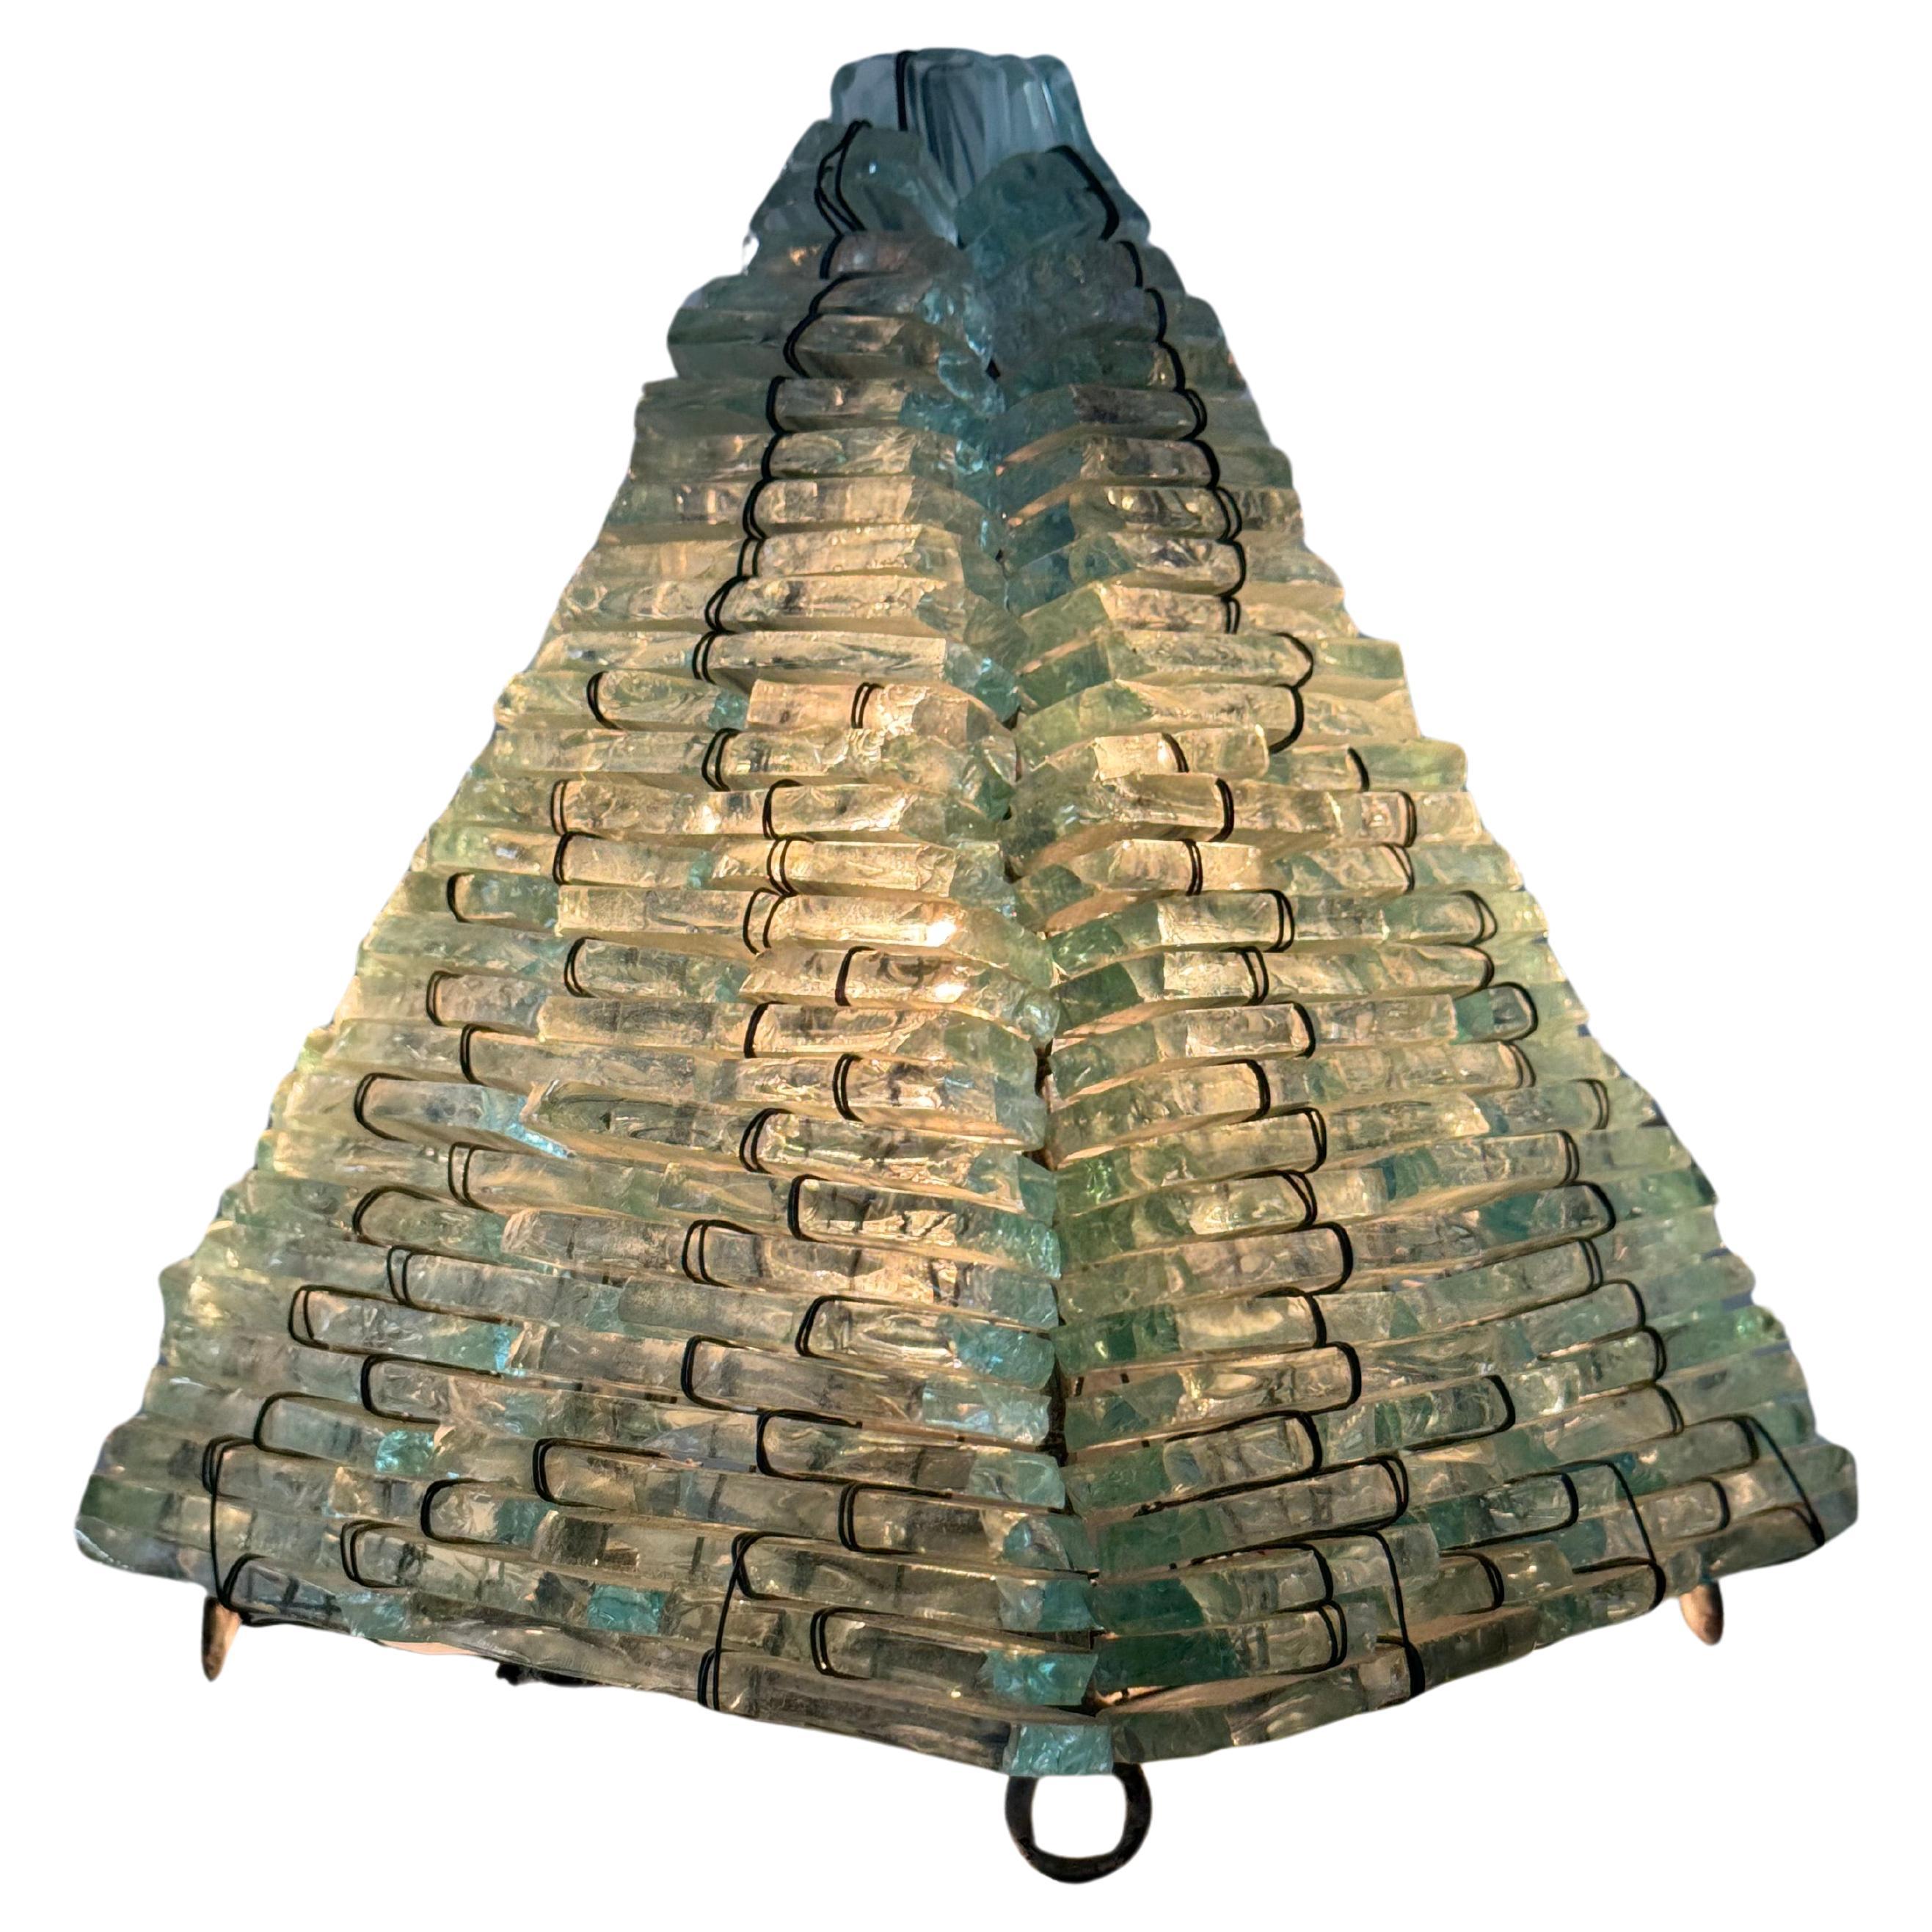 Sculptural Glass Pyramid Table Lamp, French Design 1960s For Sale